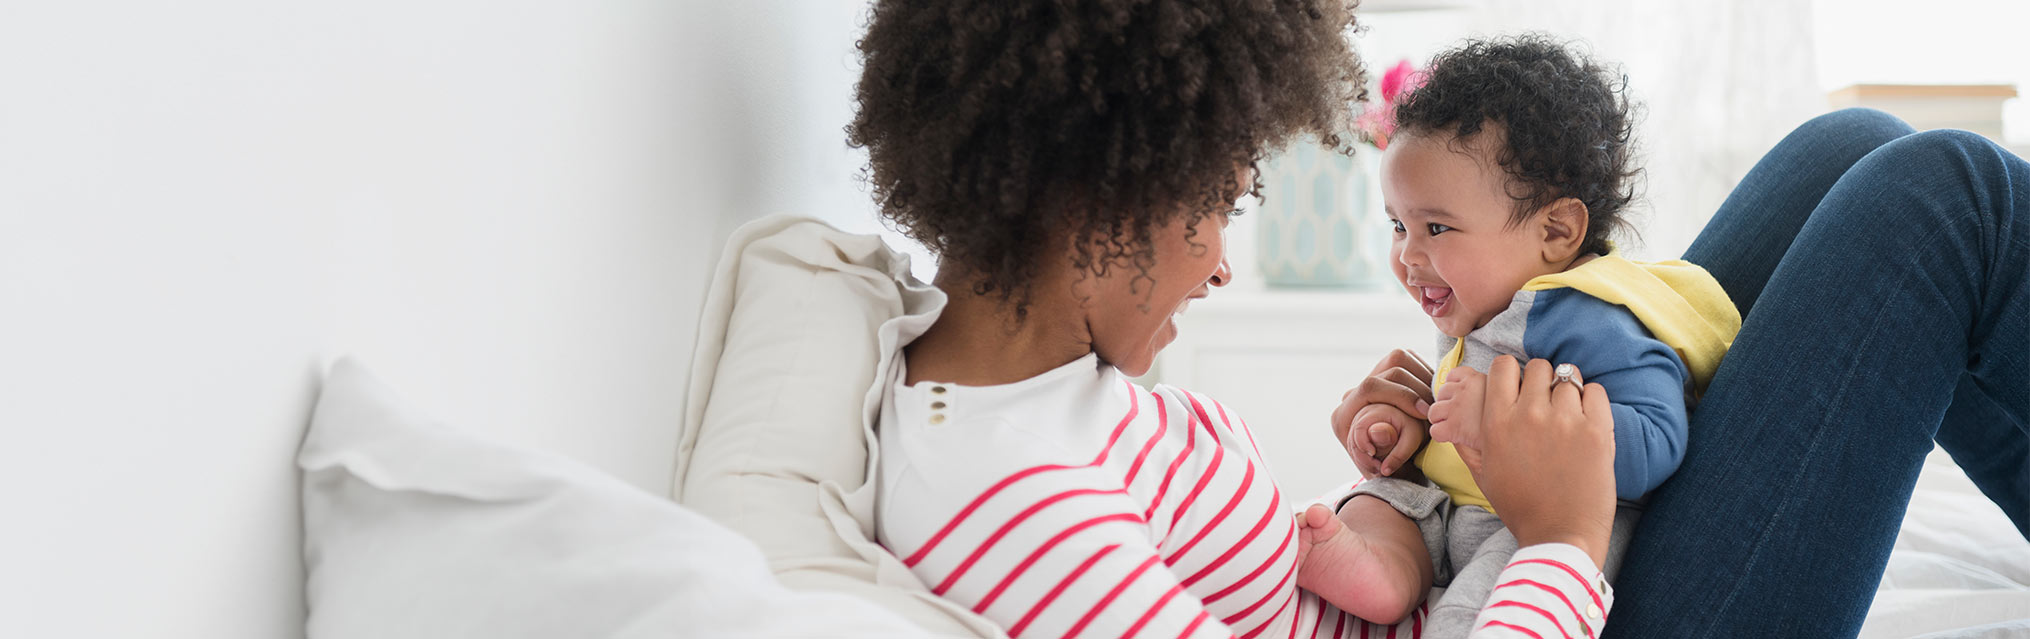 Choose an electricity plan that makes a difference for moms and babies through March of Dimes
